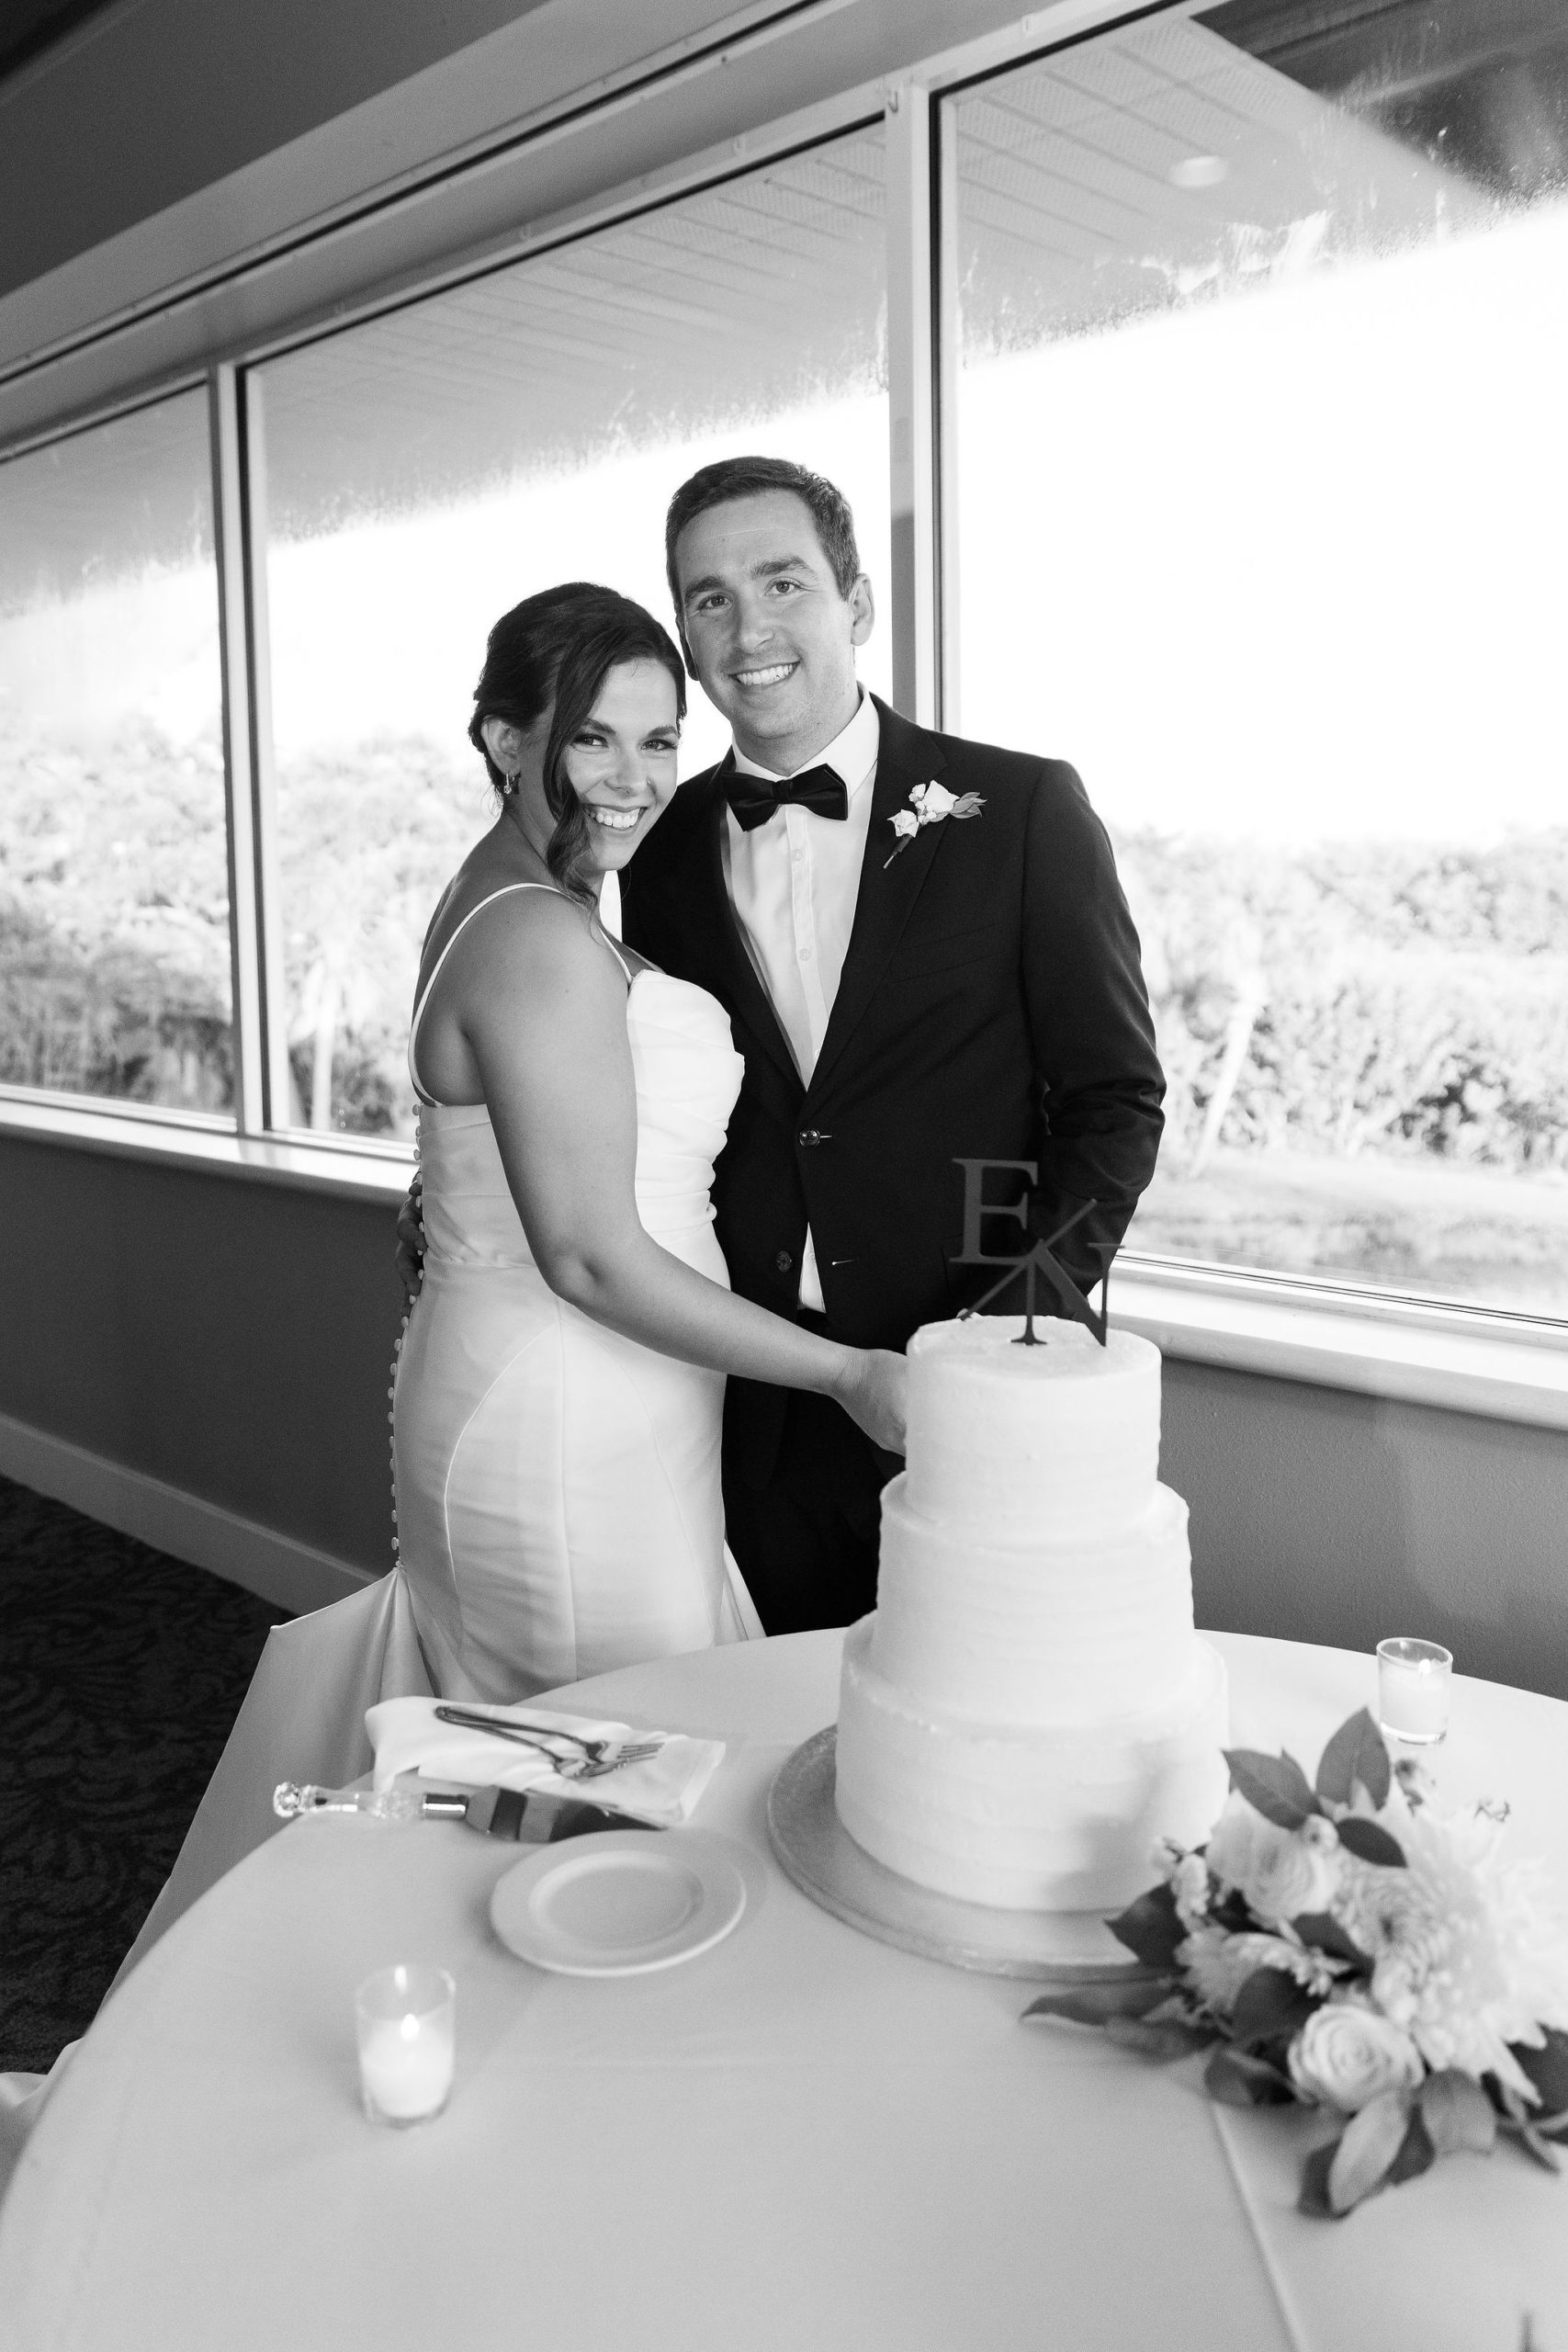 A bride and groom cut the wedding cake on their wedding day in Bradenton, Florida at a Golf Course by Jommy Photography. A wedding photographer in the Bradenton area with a timeless and classic vibe.
